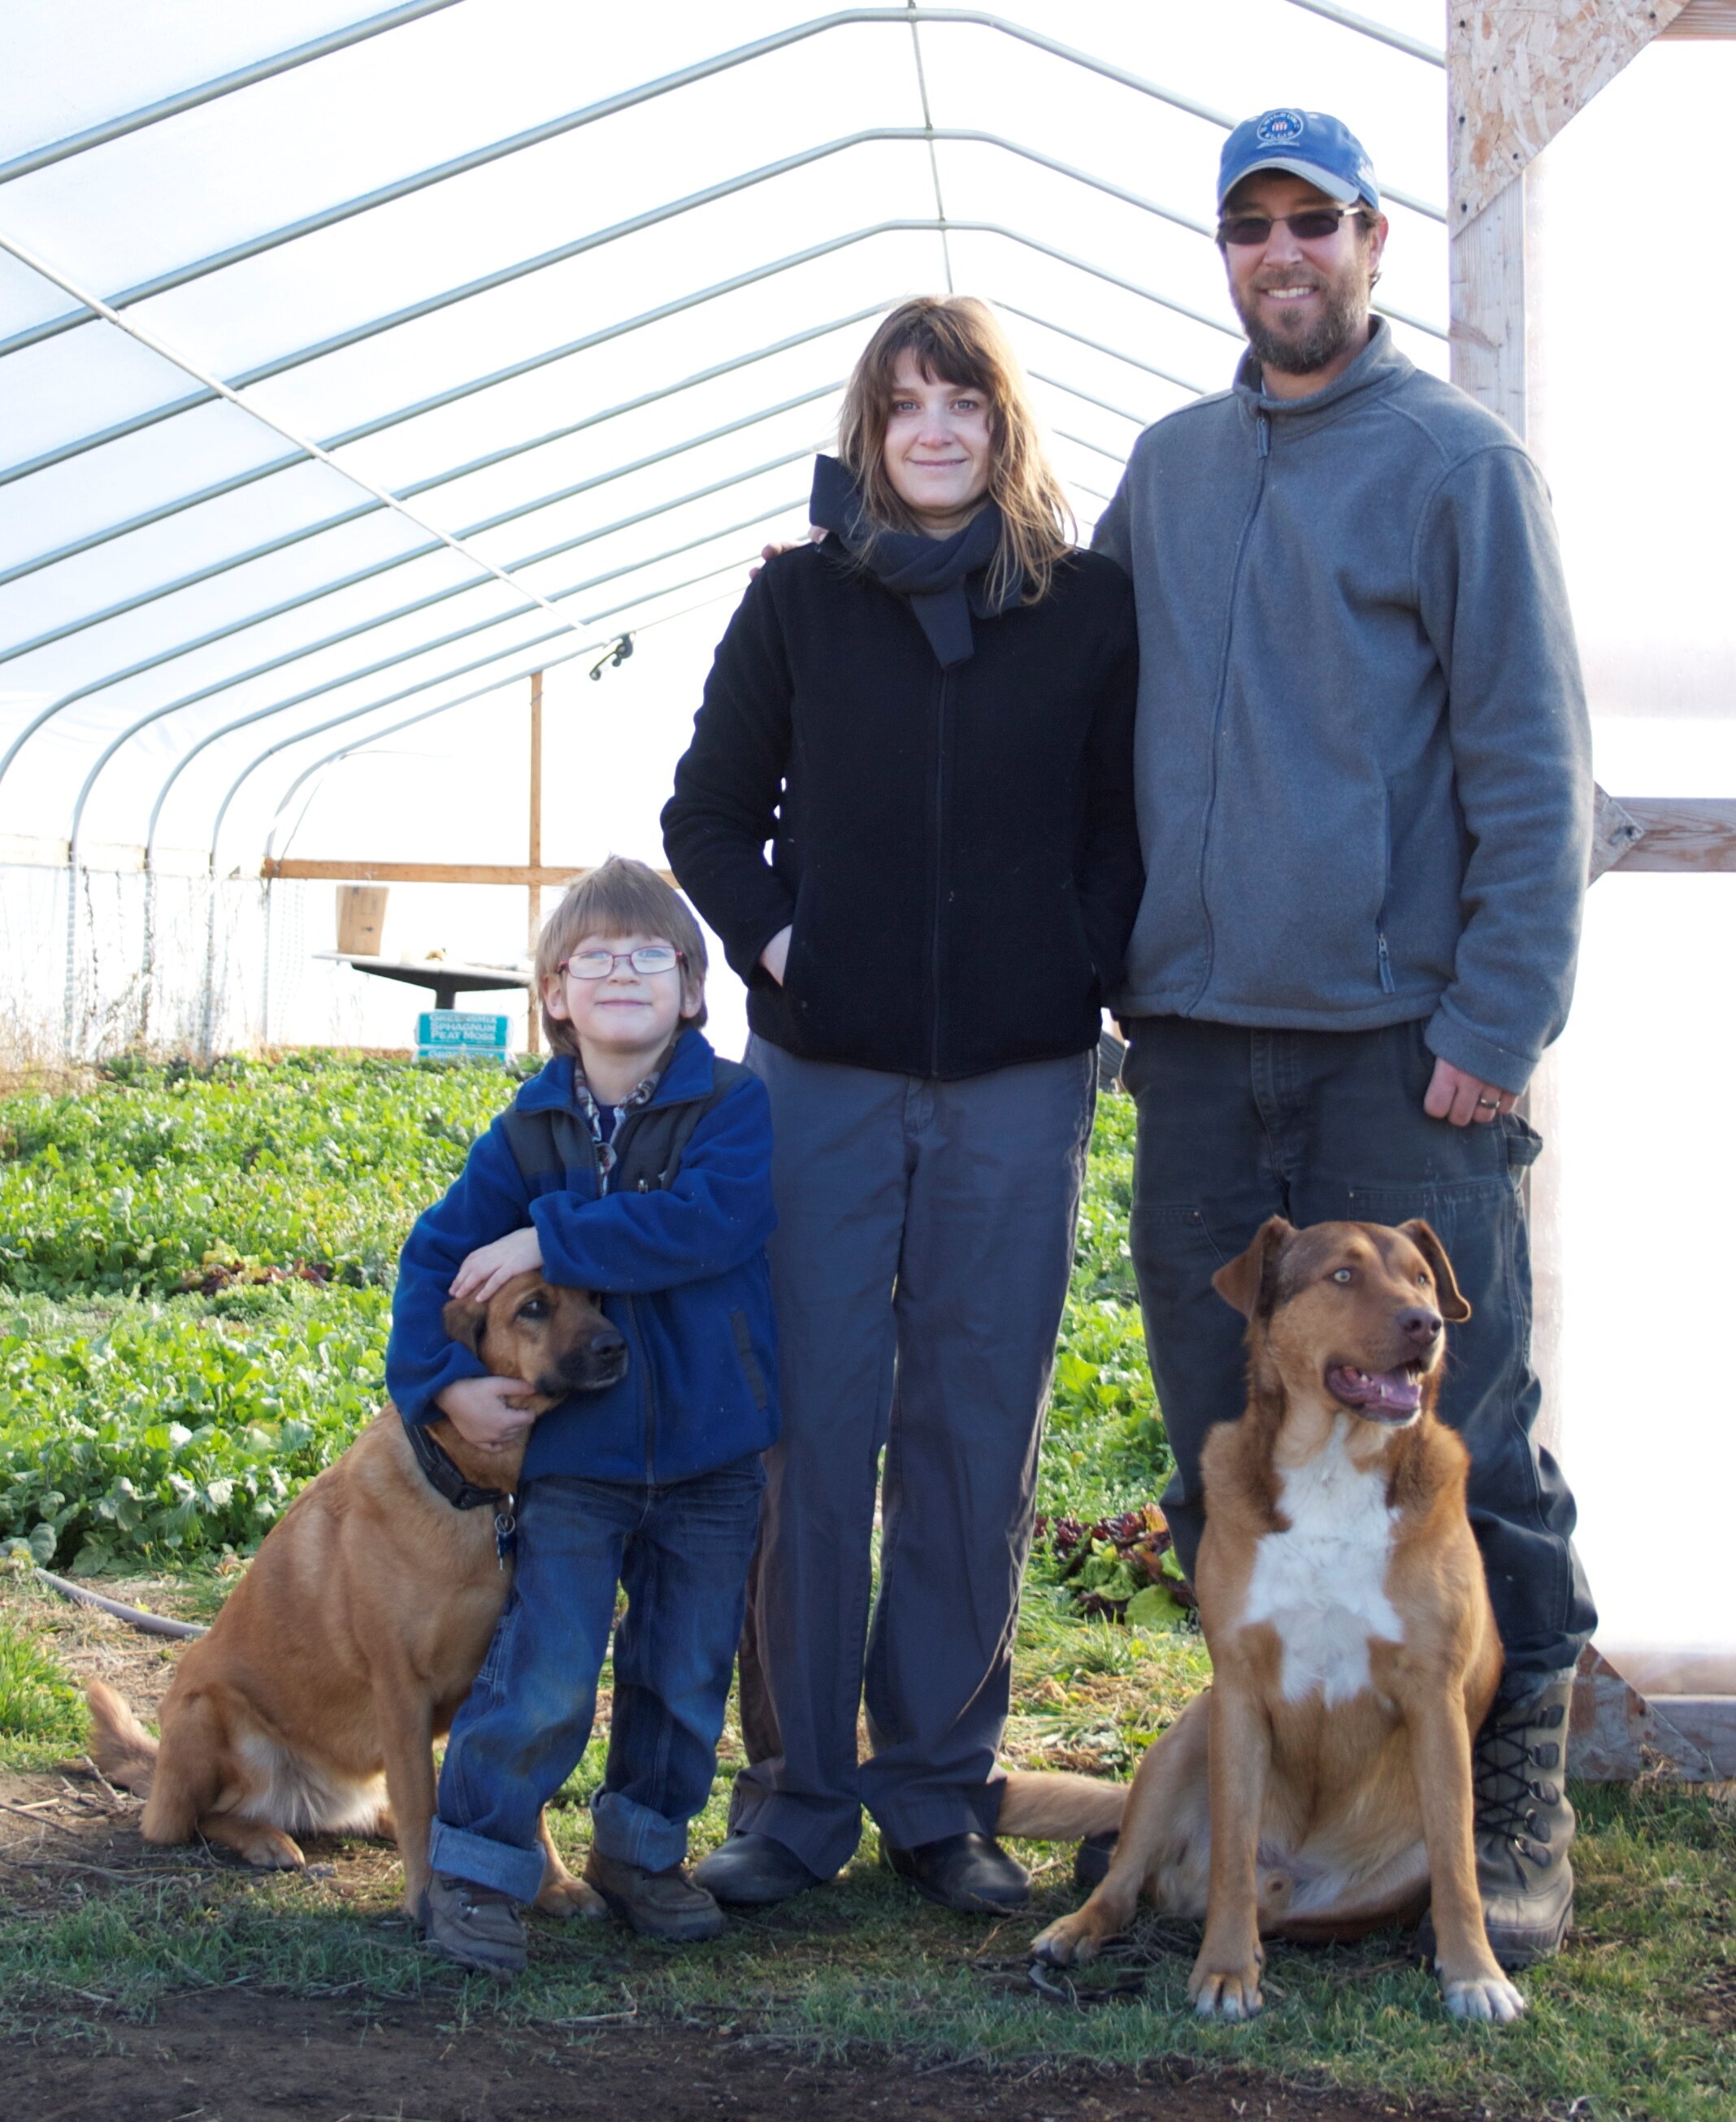 Tilth Producers of Washington April 2012 Member of the Month